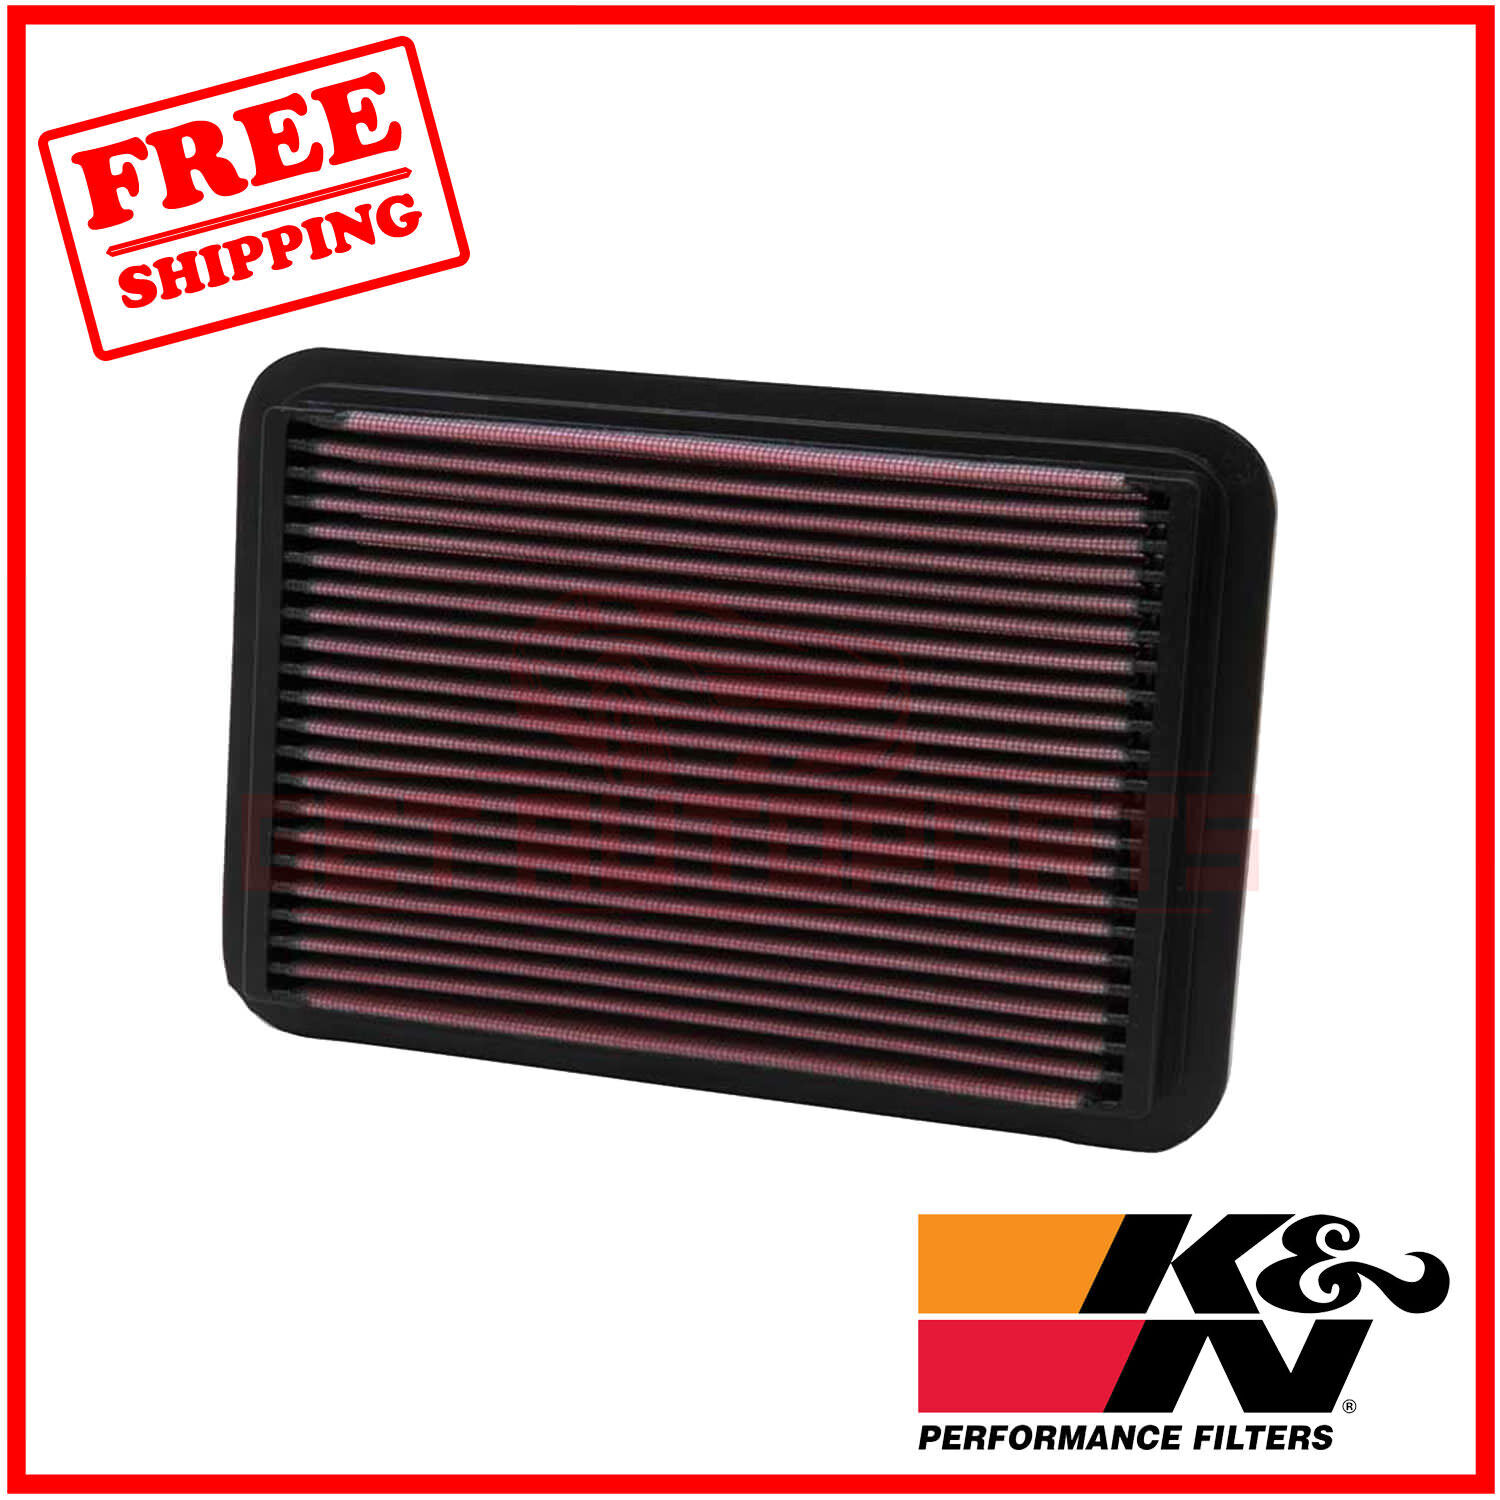 K&N Replacement Air Filter for Toyota Previa 1991-1997